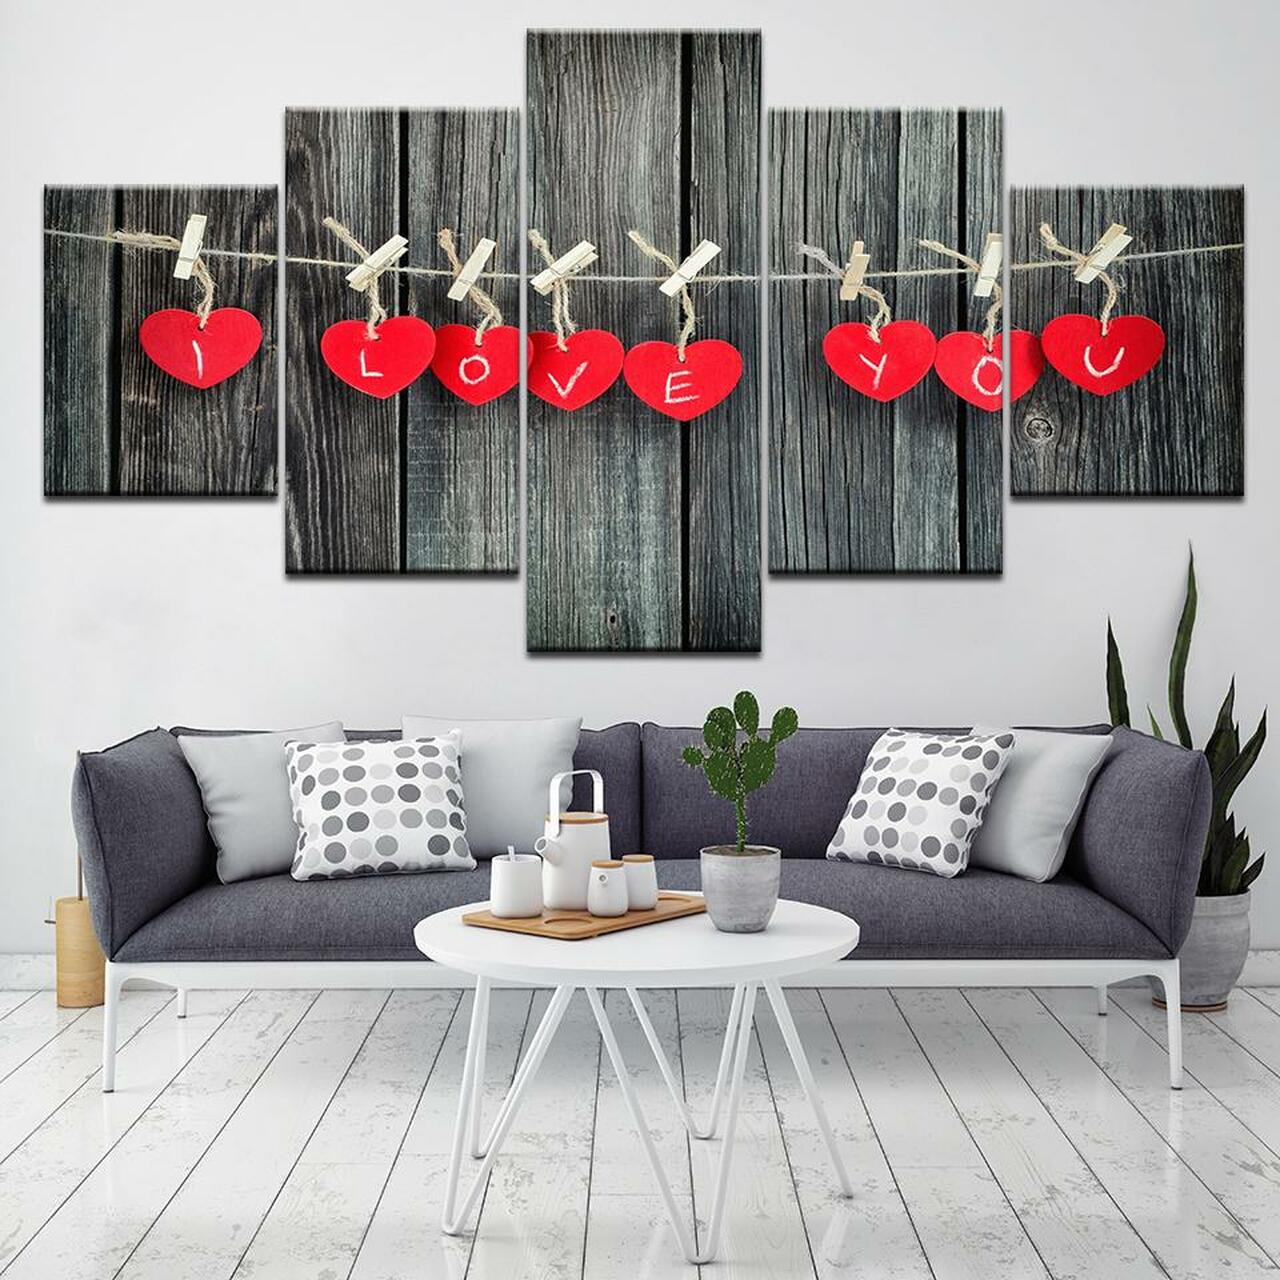 I LOVE YOU ON STRINGS 5 Piece Canvas Art Wall Decor